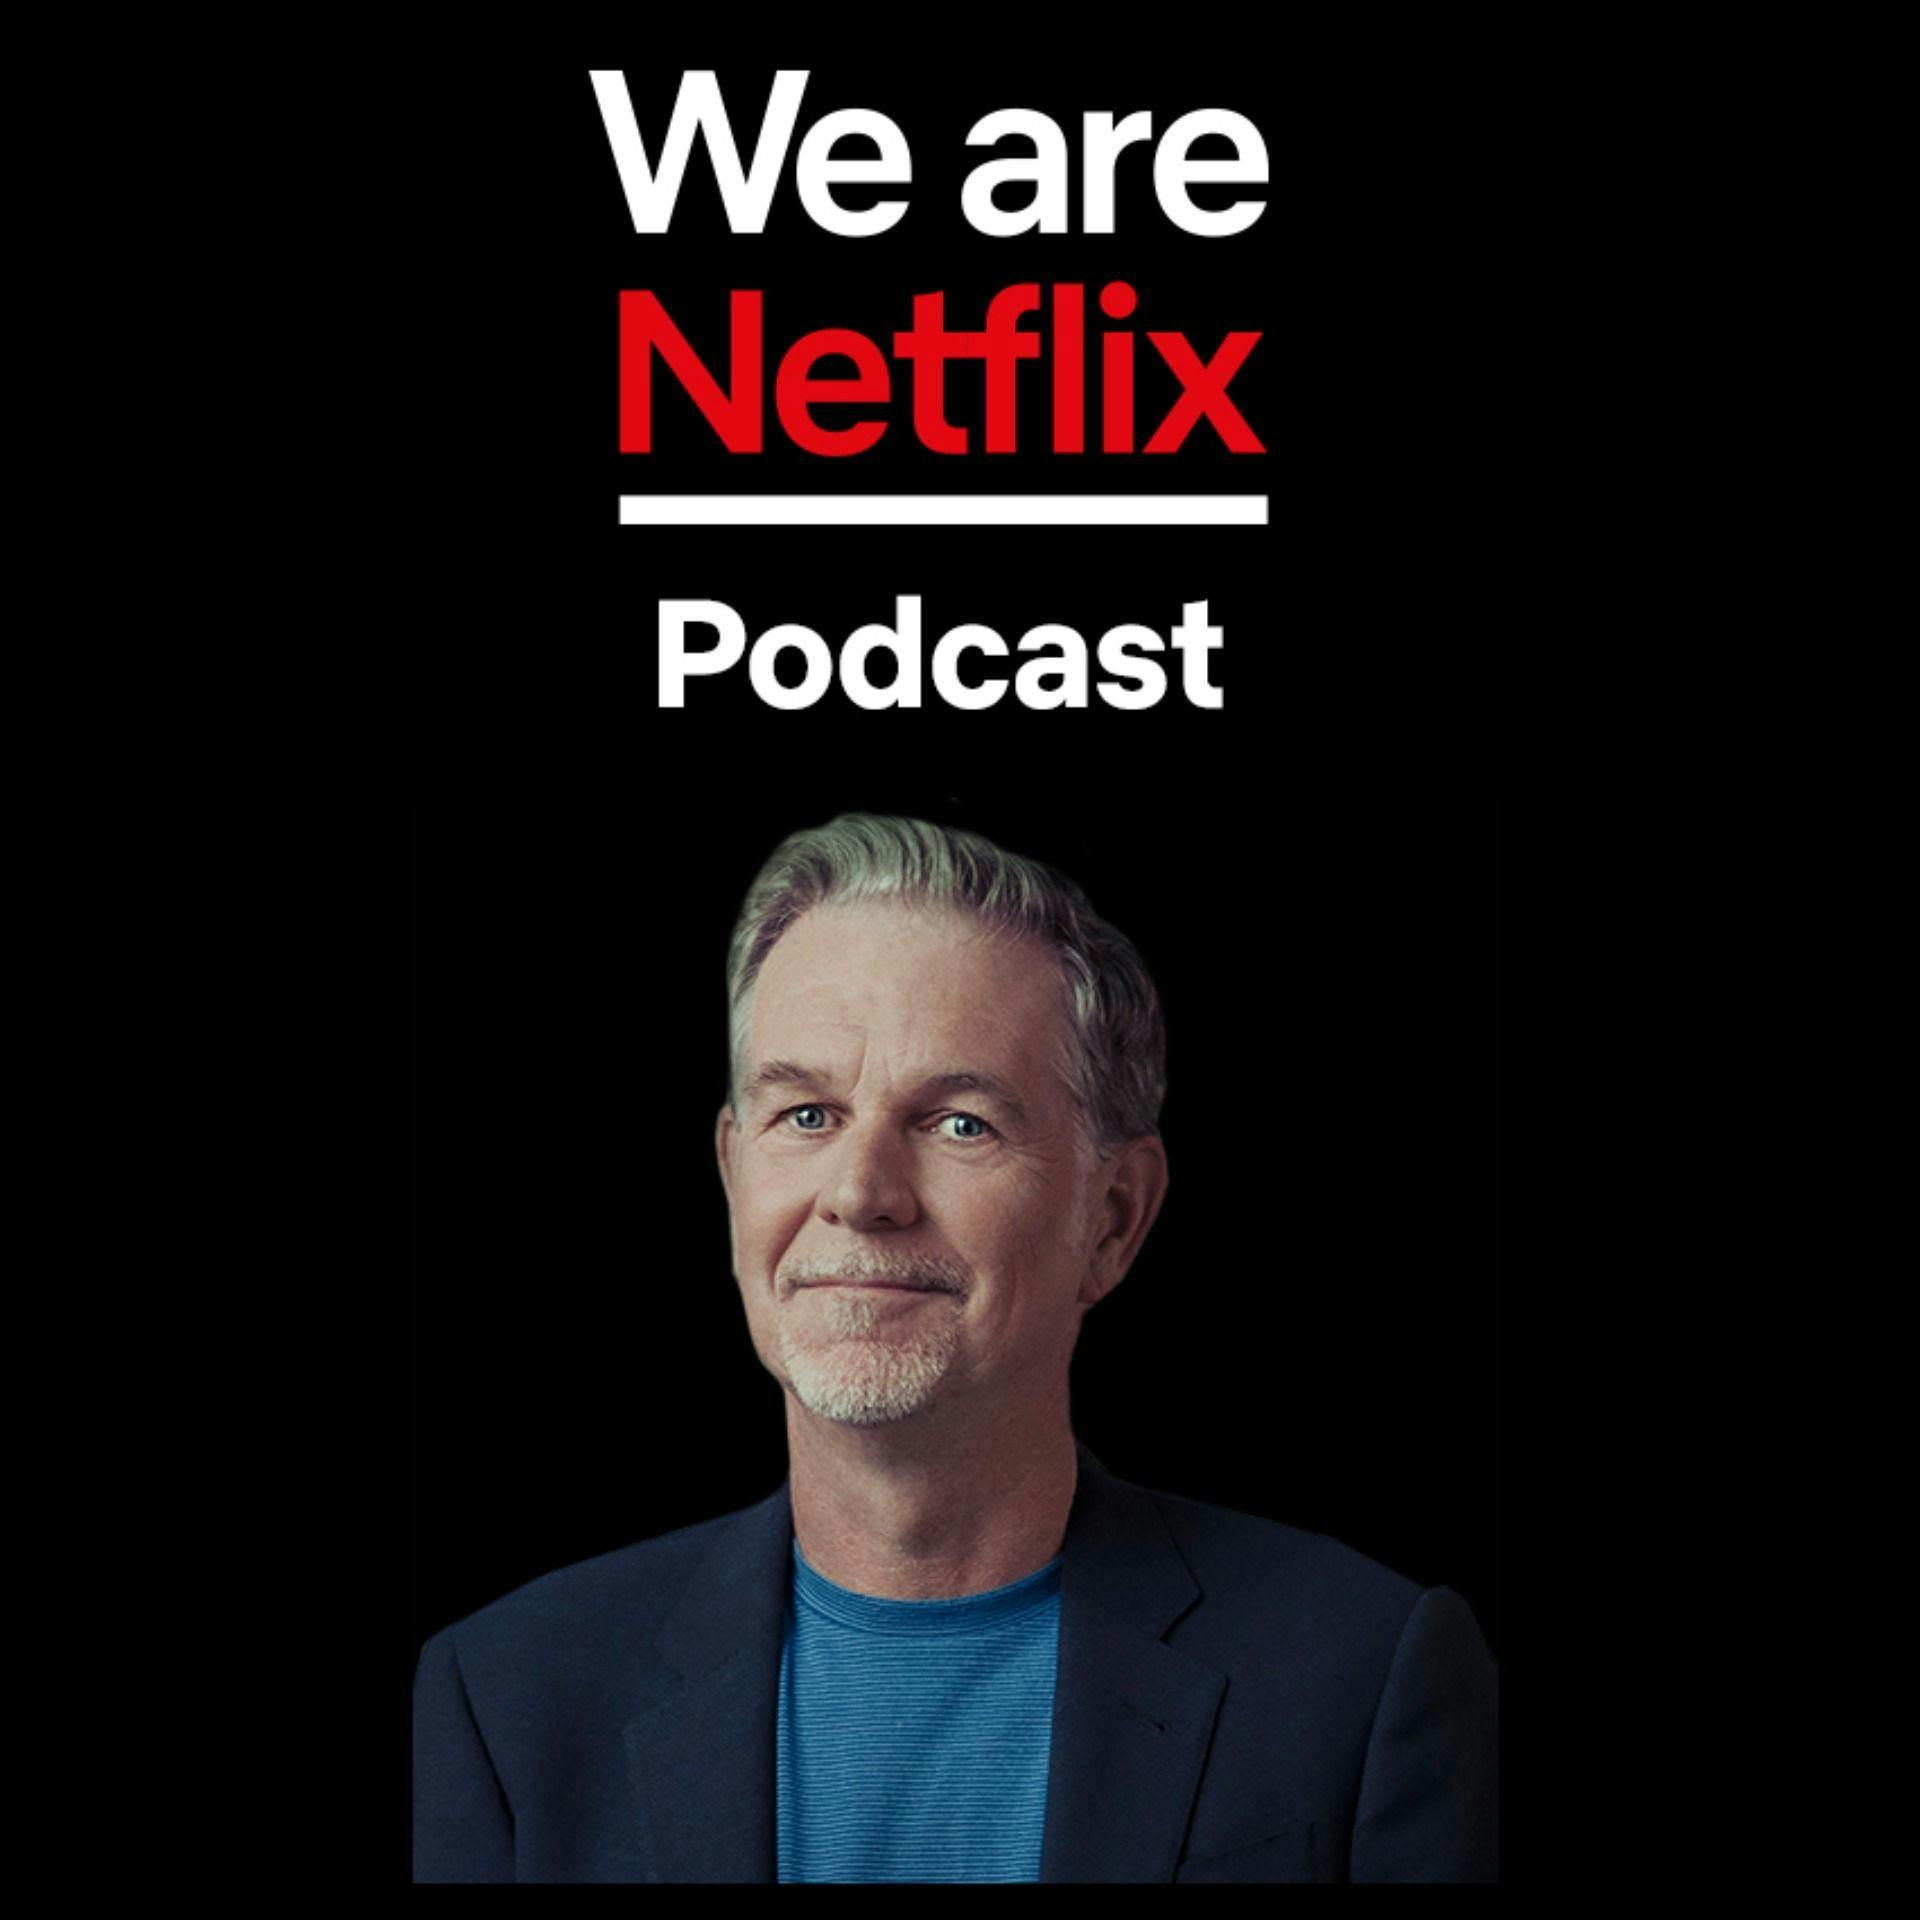 No Rules Rules: Co-CEO Reed Hastings on his new book about Netflix’s Culture